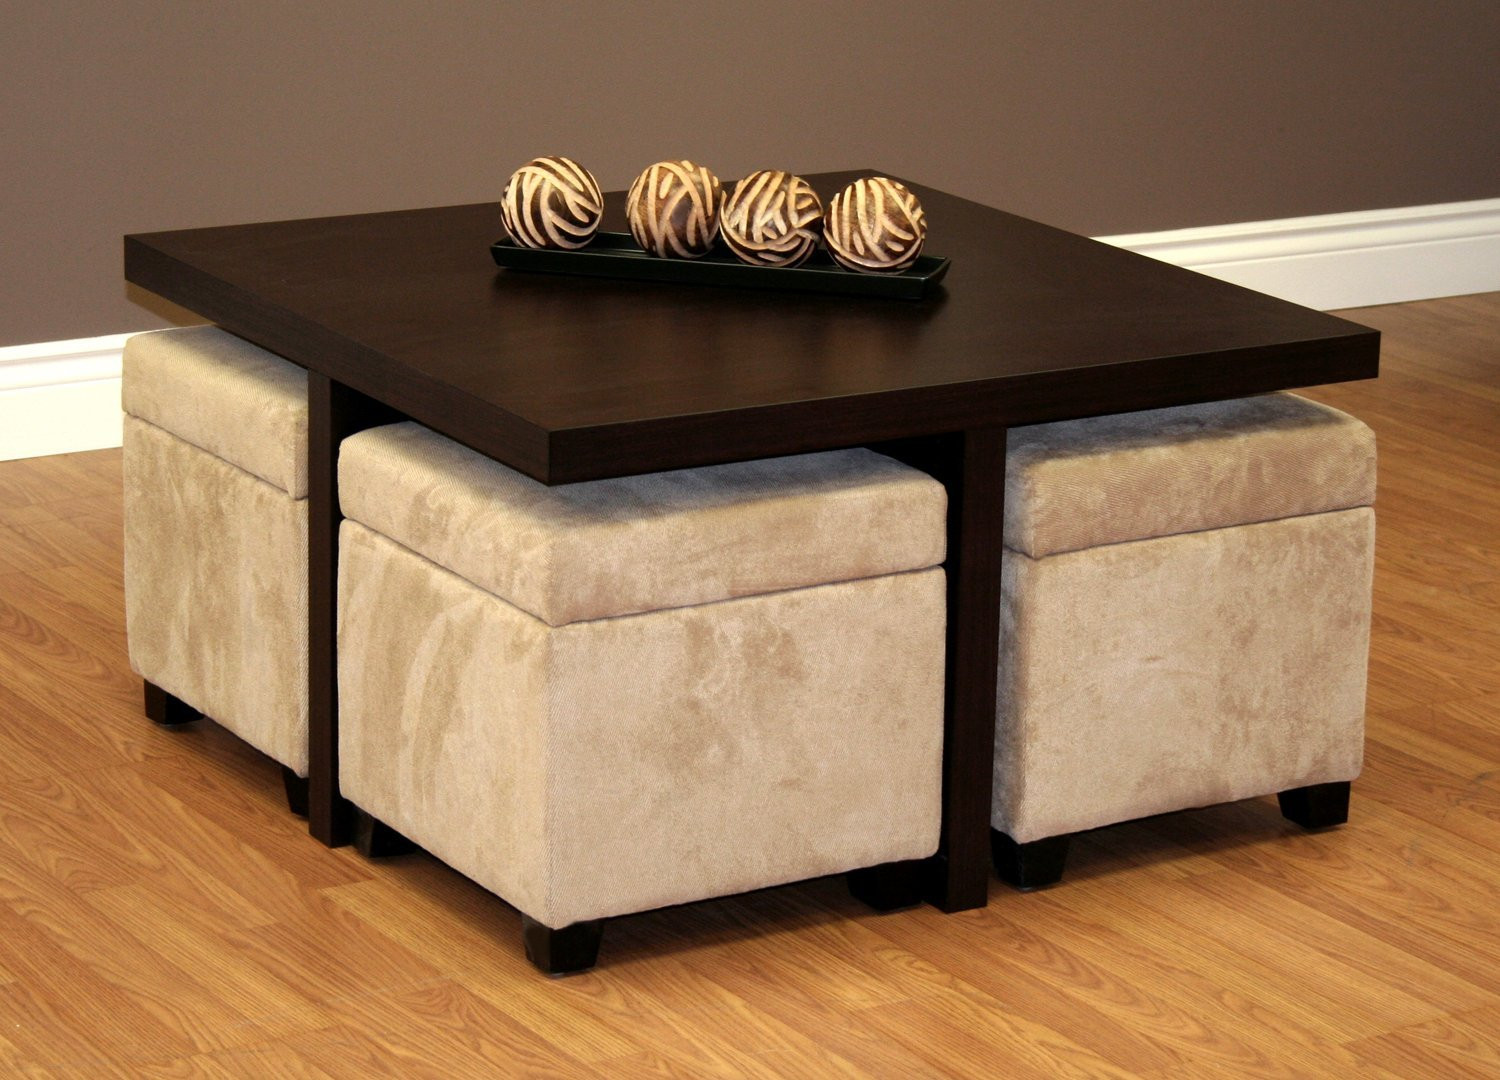 Living Room Table With Storage
 Good Softy Coffee Table Ottoman With Amazing Design For